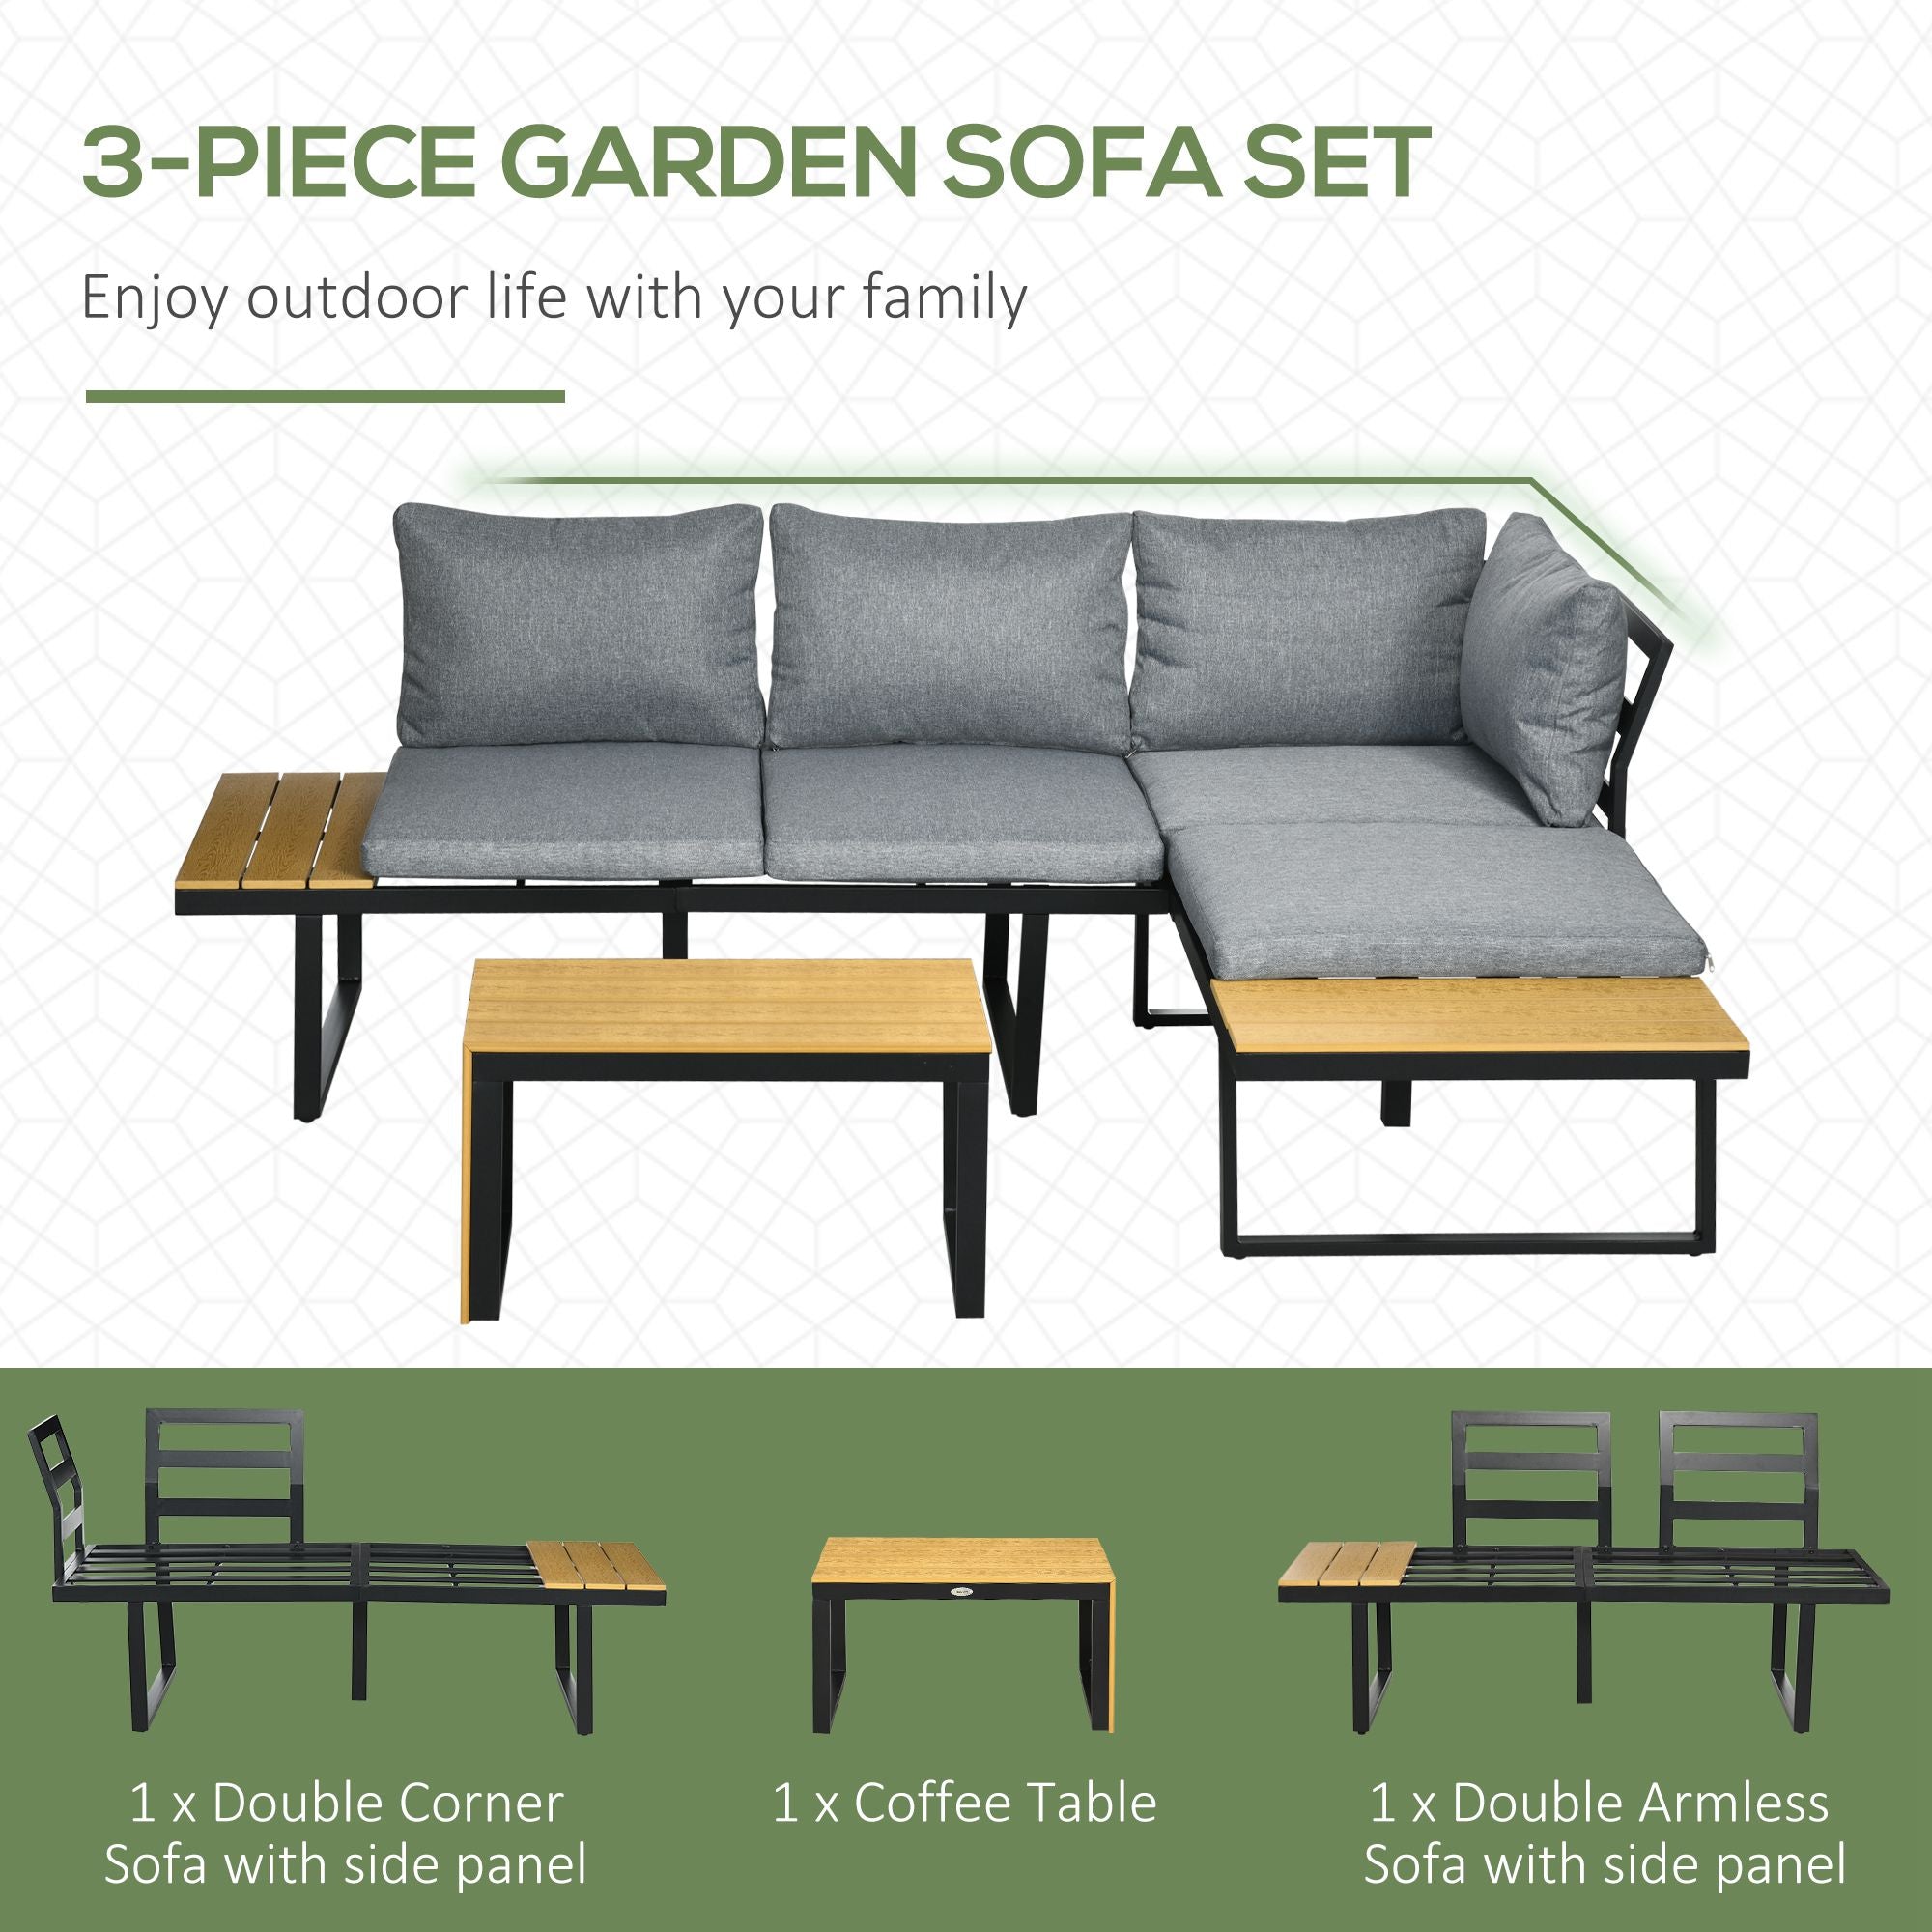 Outsunny 4-Seater Garden Sofa Set Patio Conversation Set w/ Padded Cushions, Wood Grain Plastic Top Table and Side Panel, Dark Grey - TovaHaus